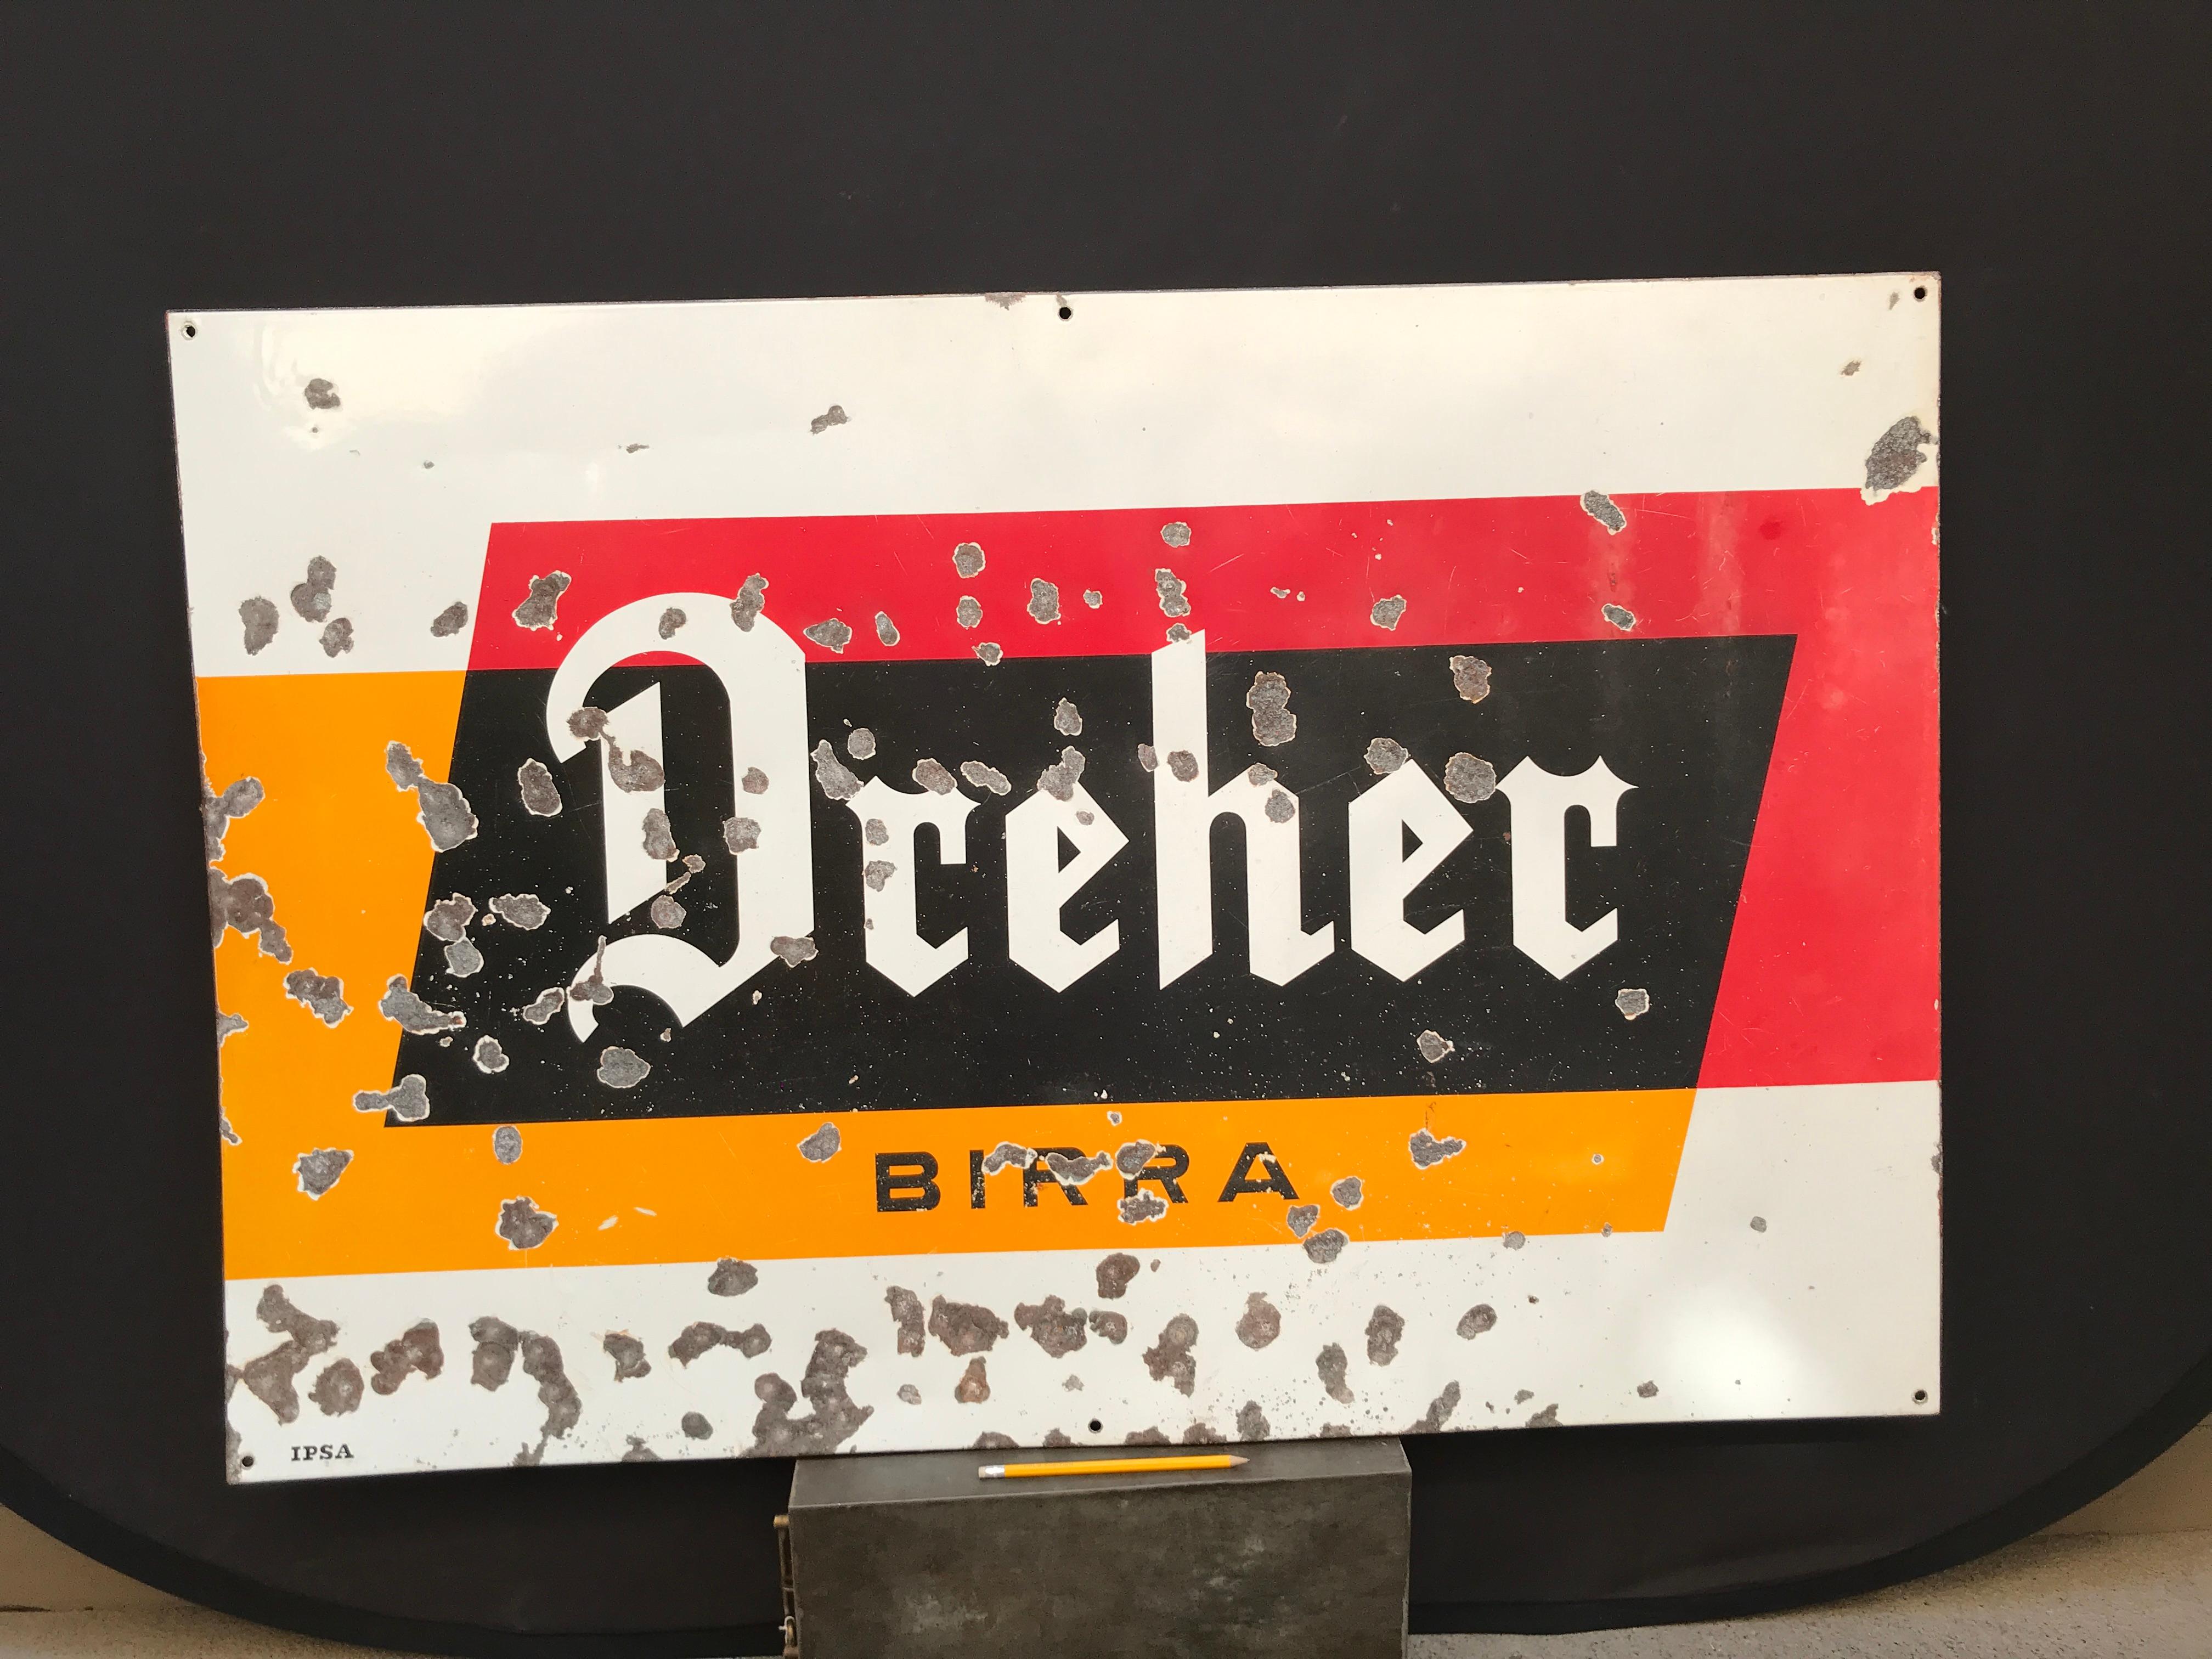 Vintage rectangular metal enamel Dreher Beer advertising sign produced in Italy in the 1950s by IPSA.

The Dreher Birra logo ( Dreher Beer ) in Gothic font lays on a geometric background of orange, red, white and black blocks of colors.

The